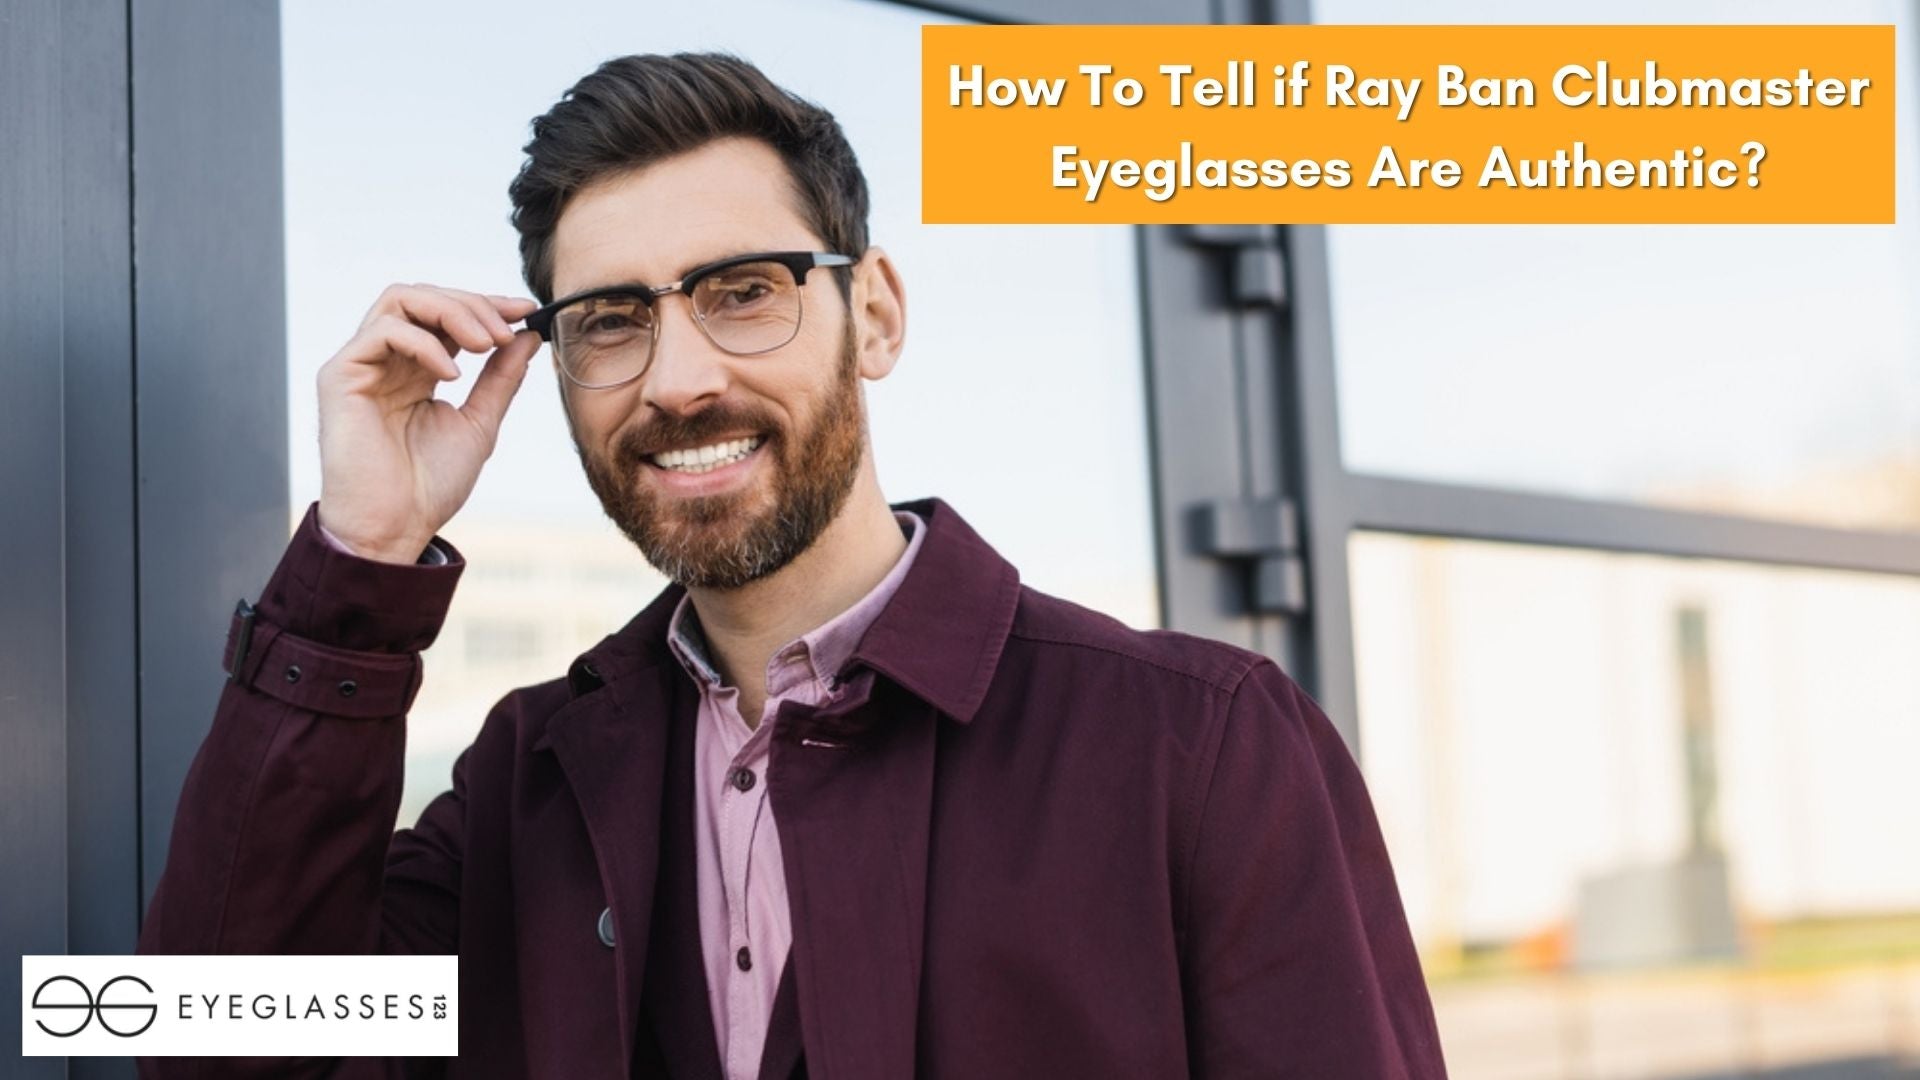 How To Tell if Ray Ban Clubmaster Eyeglasses Are Authentic?